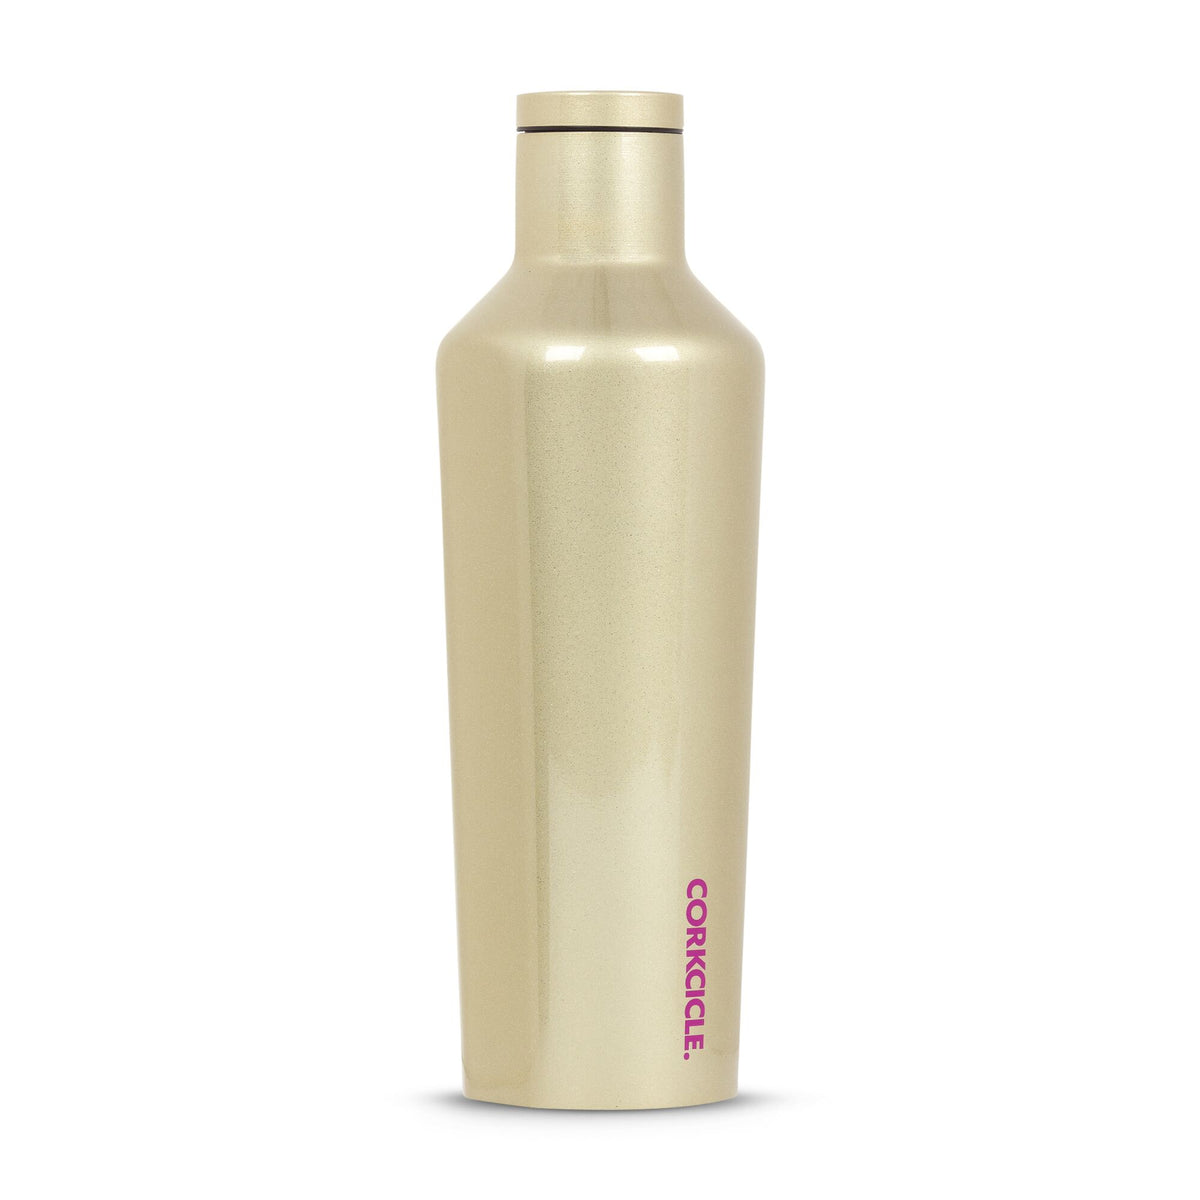 CORKCICLE - Canteen Glampagne 16 oz